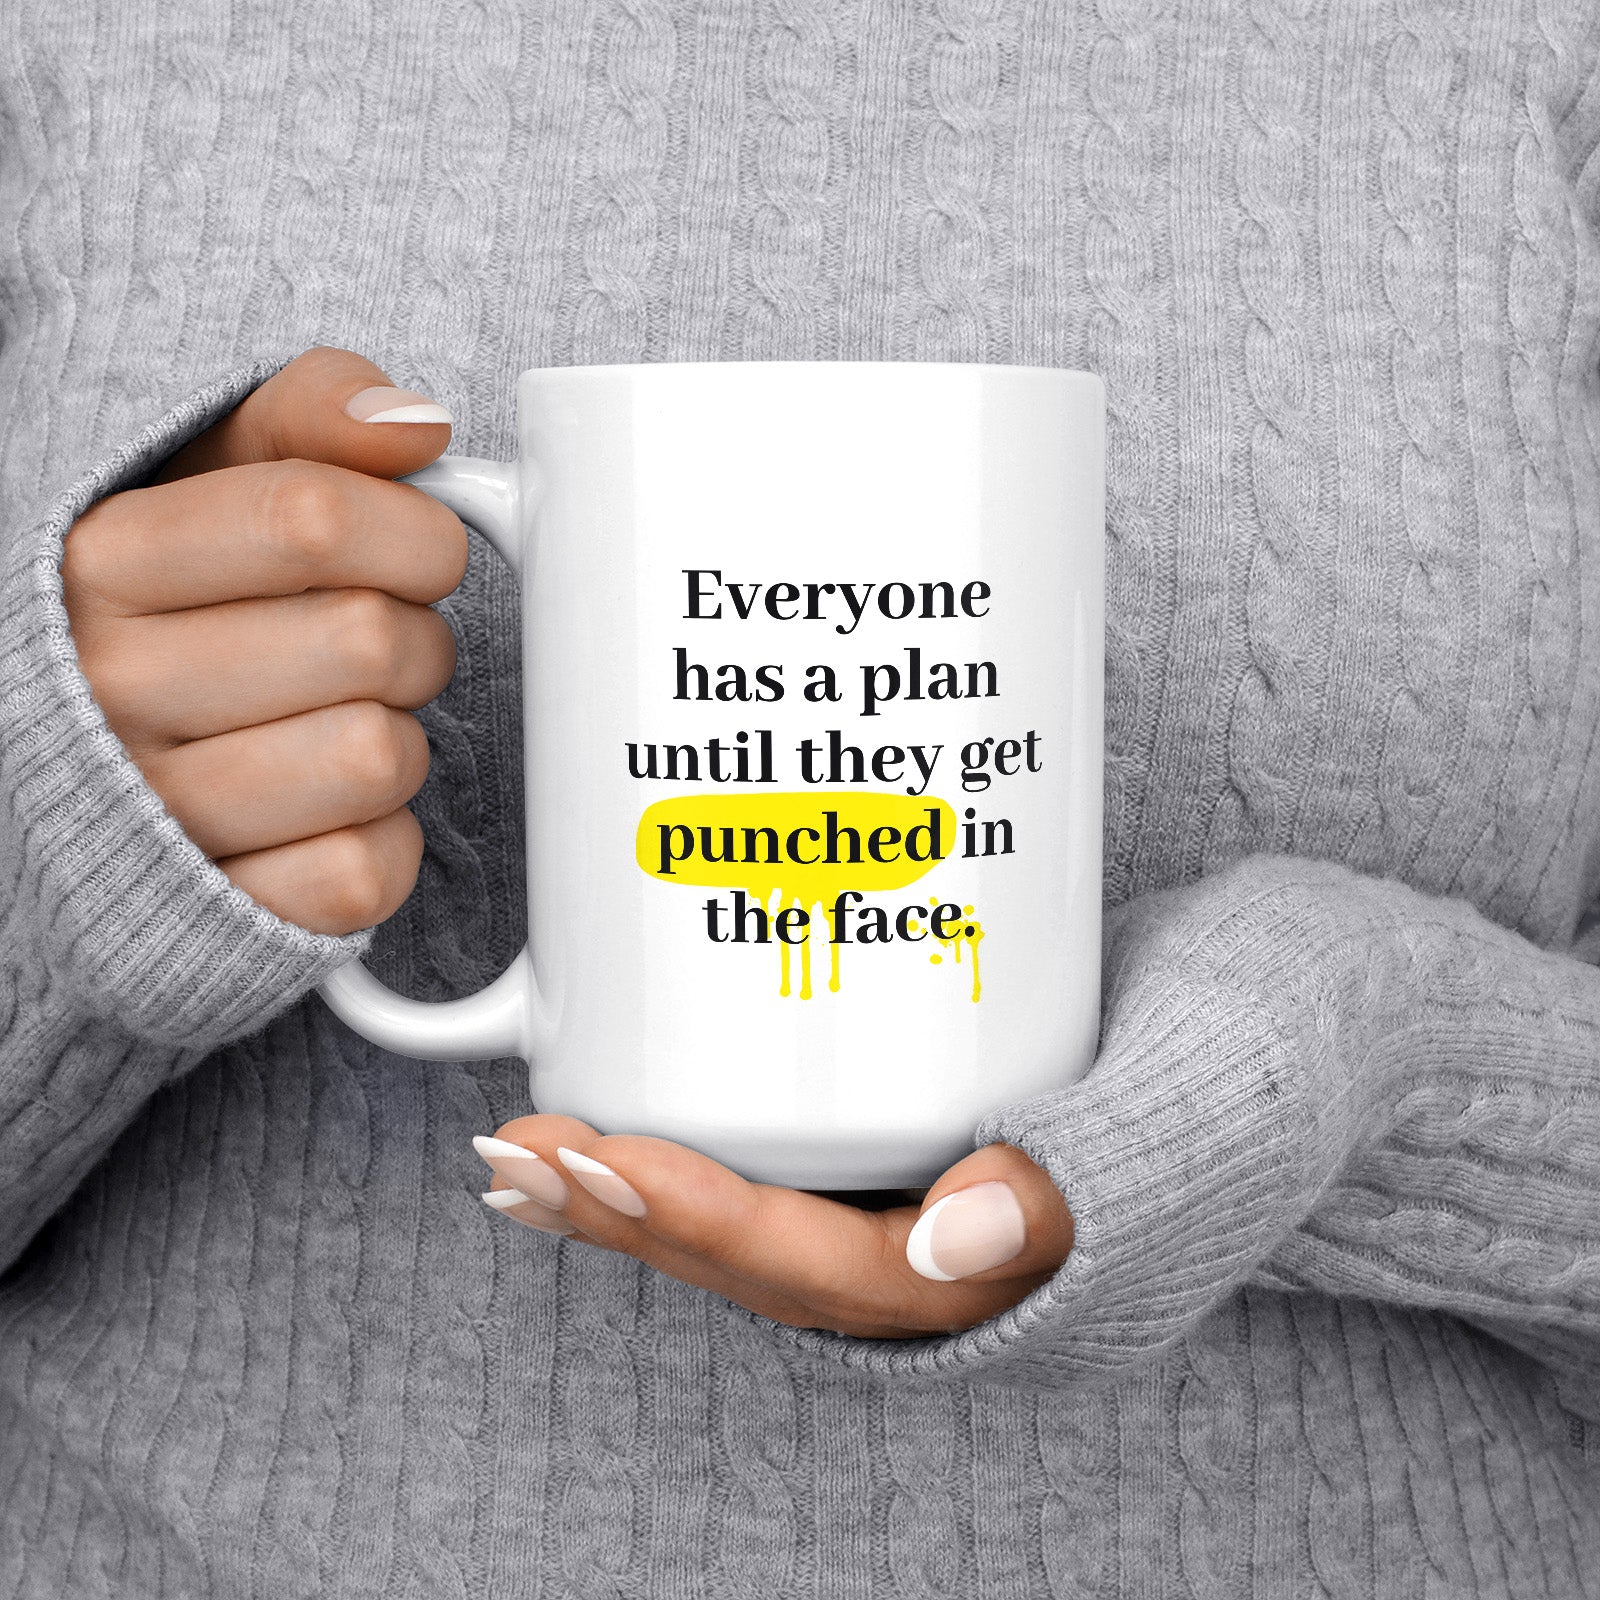 Be inspired by Mike Tyson's famous quote, "Everyone has a plan until they get punched in the face" on this white and glossy 15oz coffee mug with the handle on the left.